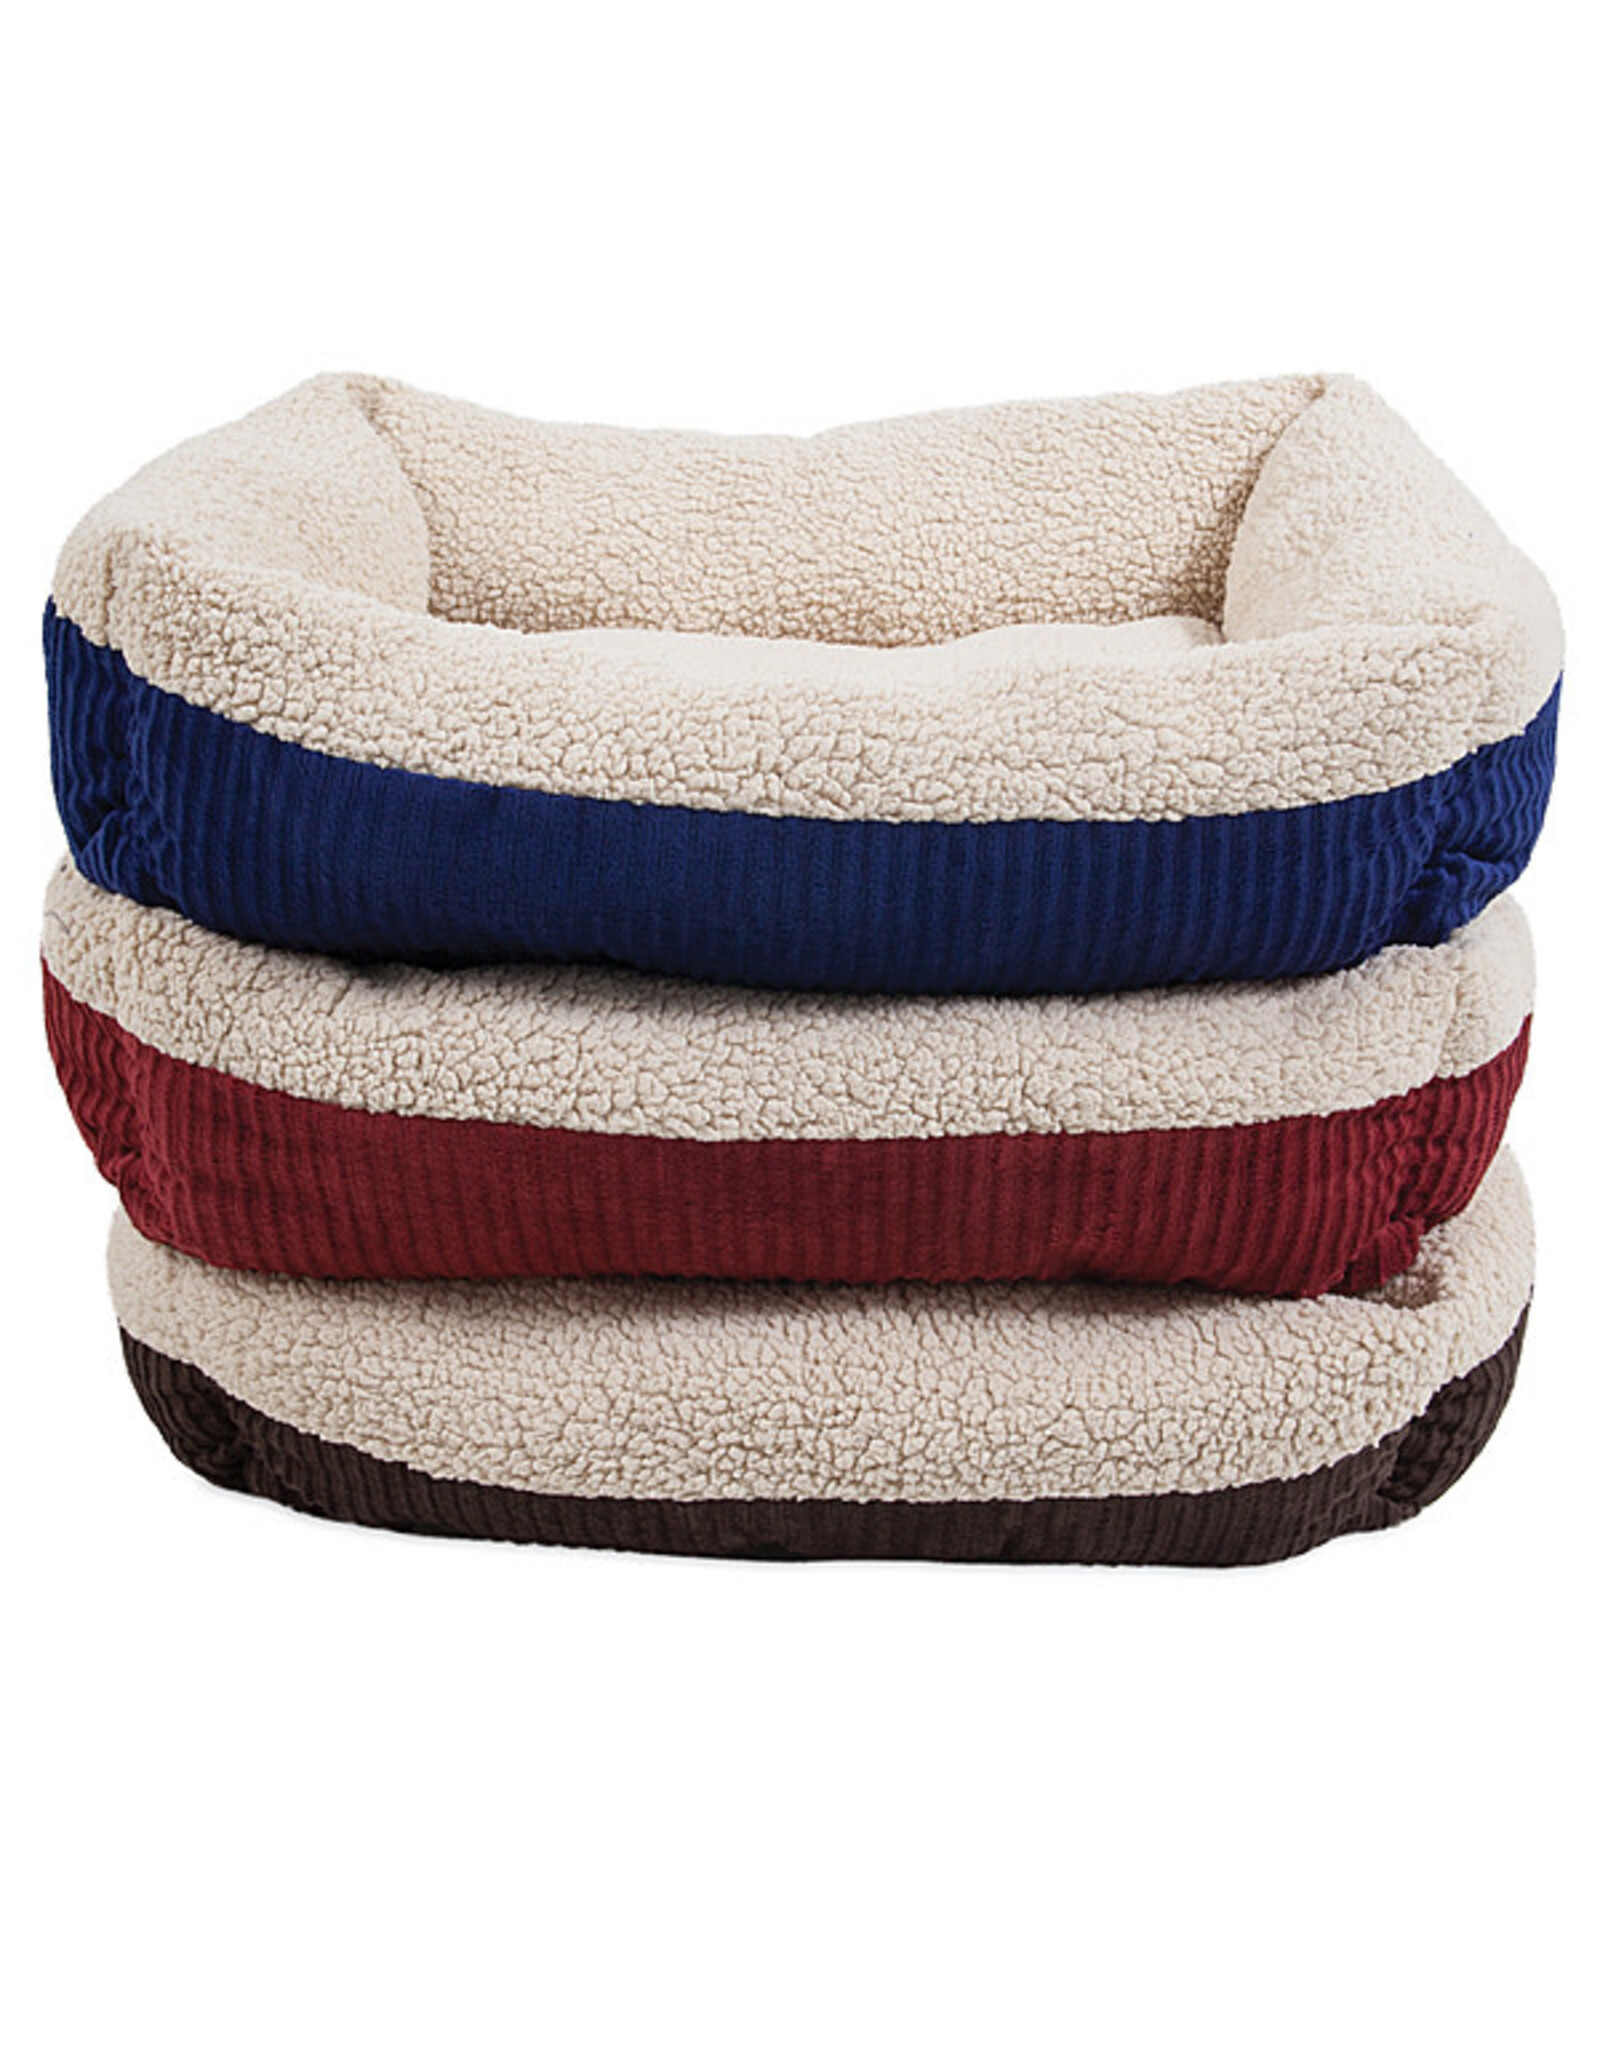 Petmate Self-Warming Bed Assorted Large 30" x 24"